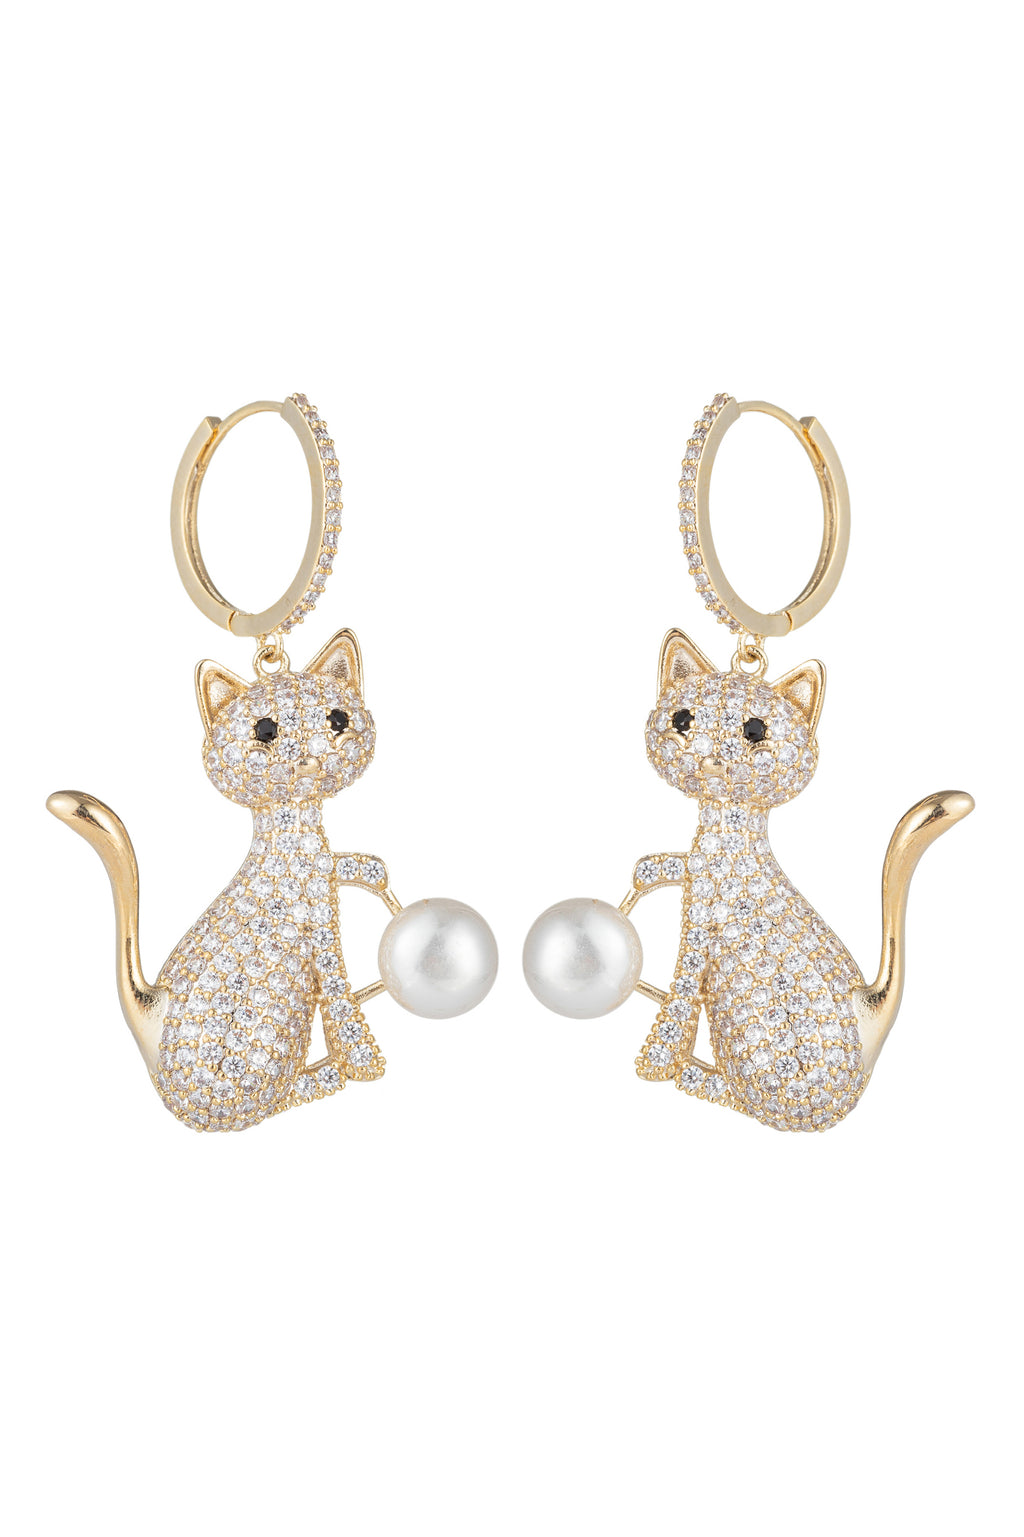 18k gold plated cat earrings studded with CZ crystals.